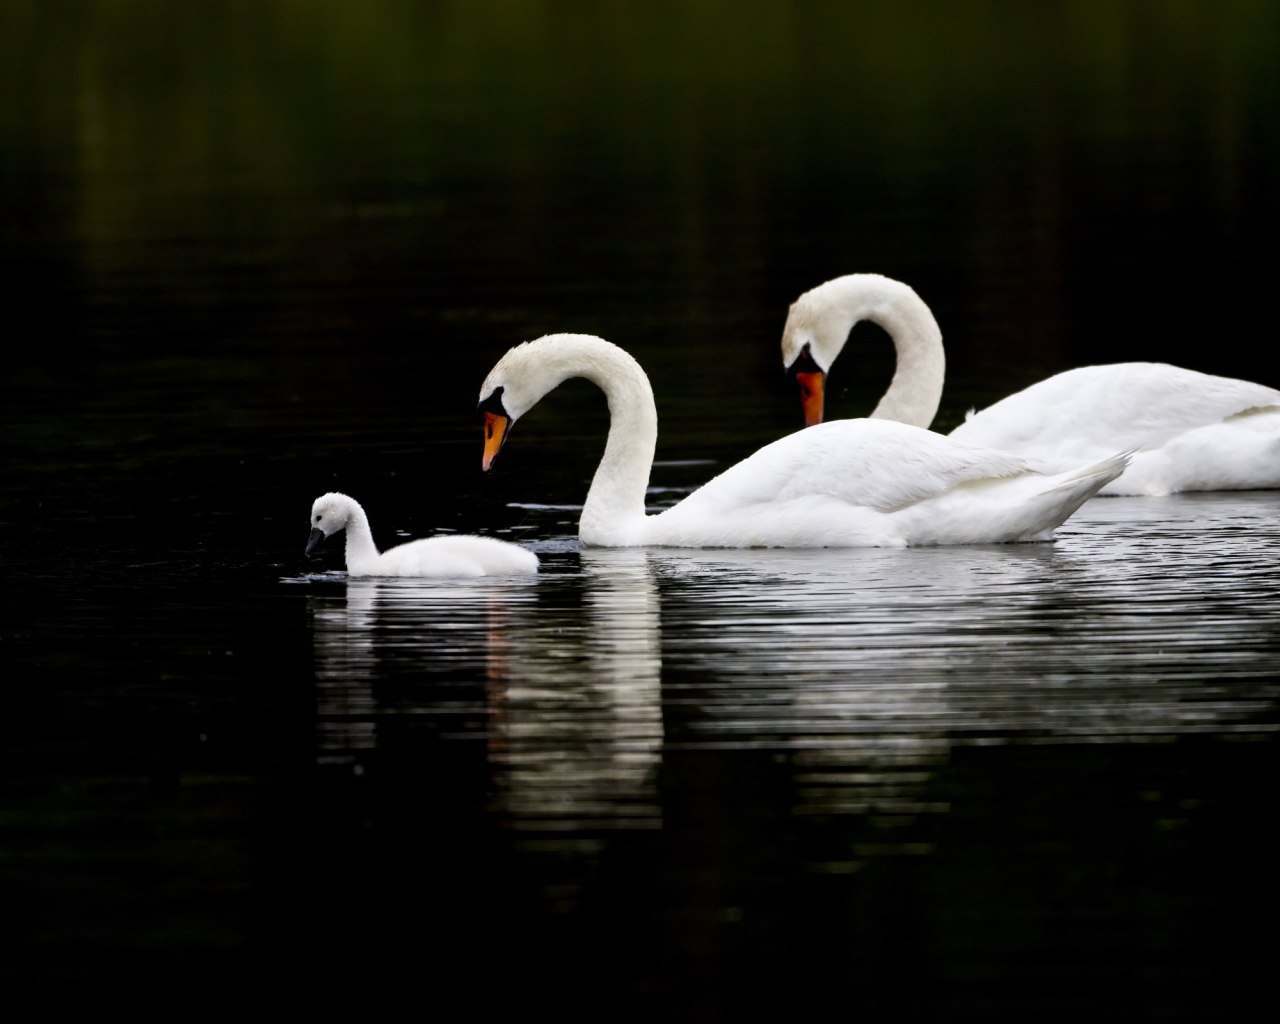 The family of swans